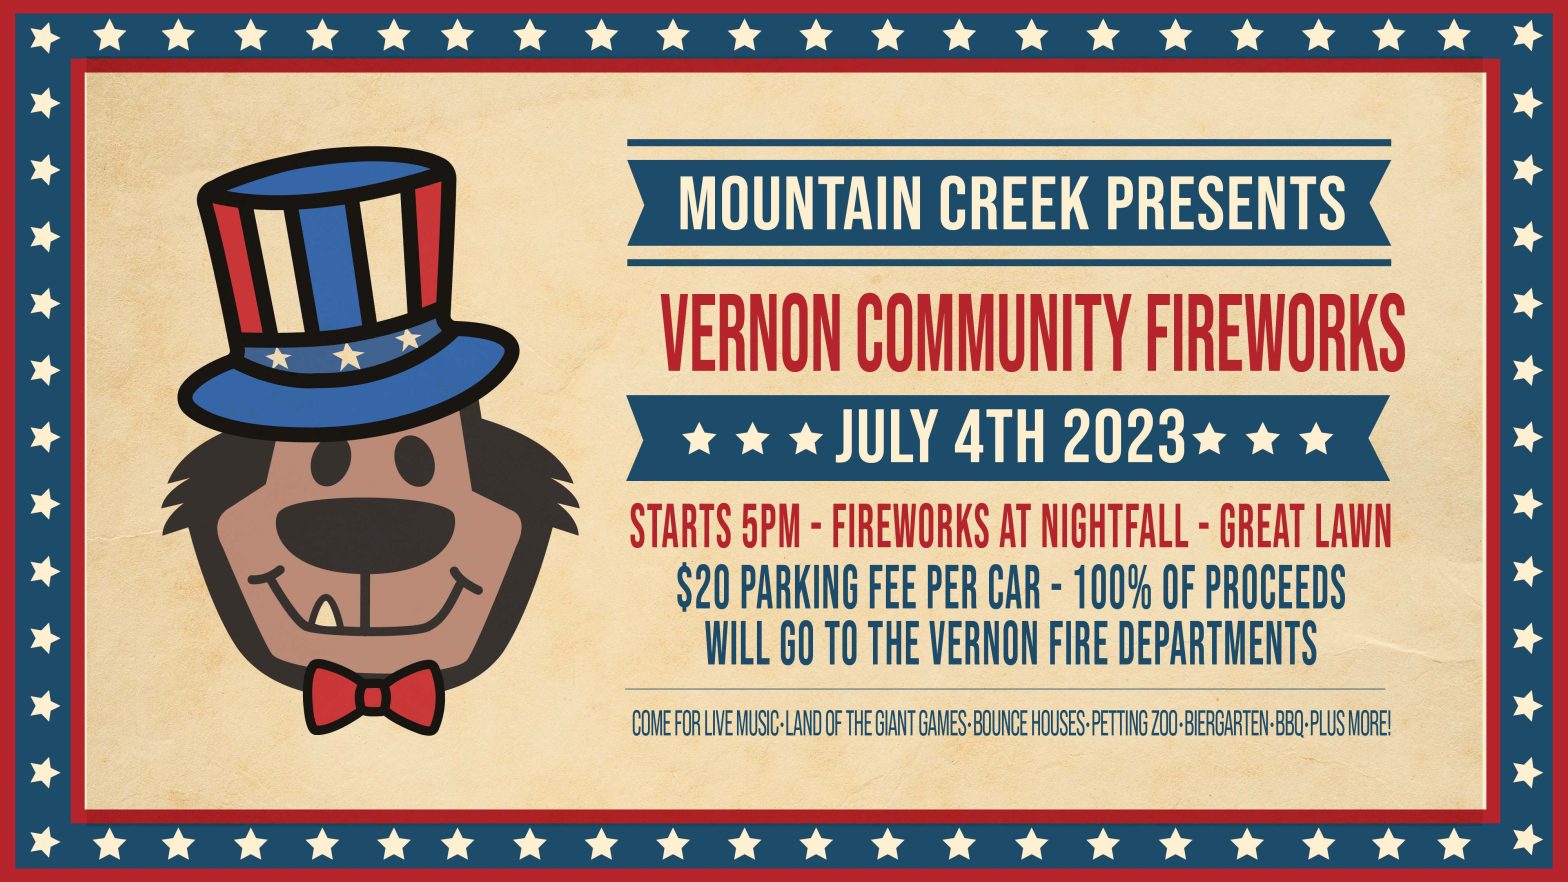 4th of July event at Mountain Creek in Vernon New Jersey